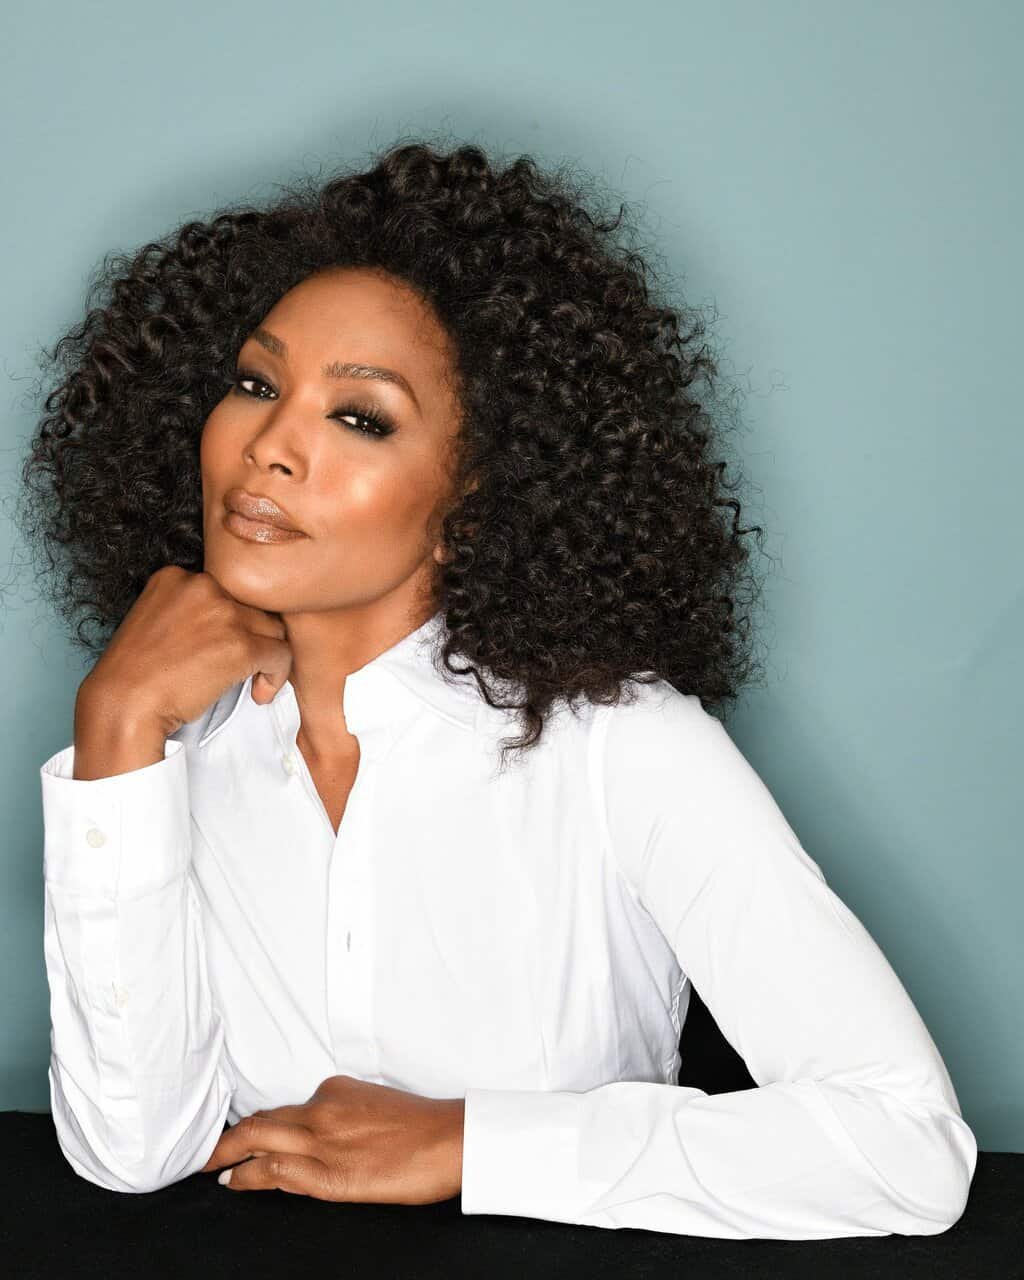 Angela Bassett Honored at 5th Annual Celebration of Black Cinema and Television